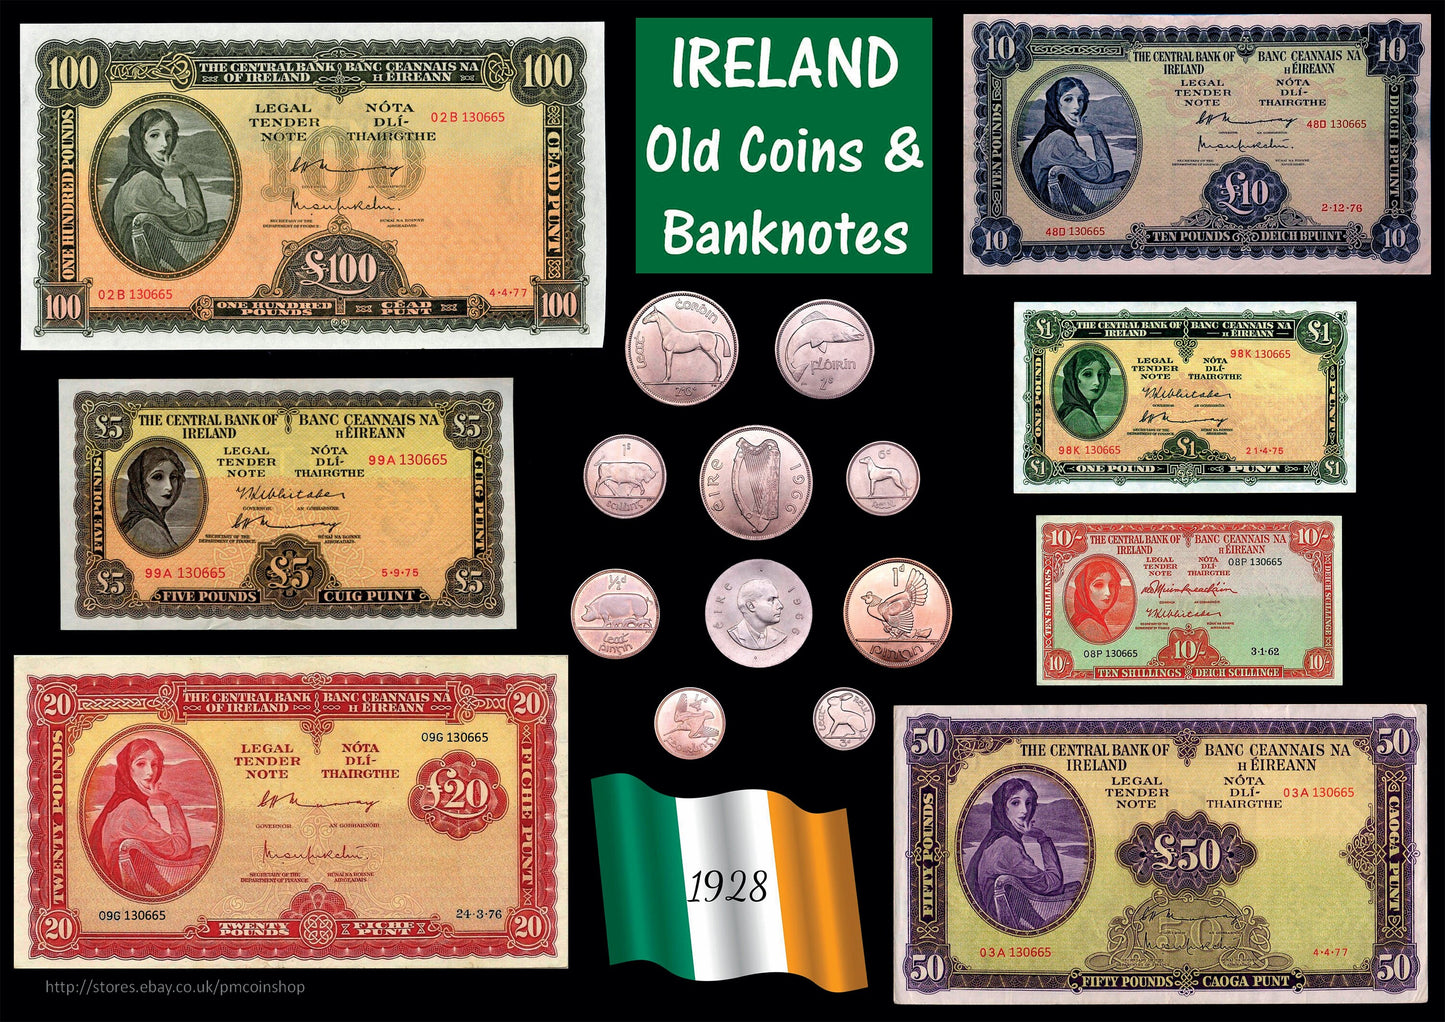 Old Coins & Banknotes Ireland poster A3 (rolled) Irish EIRE Lady Lavery [IRECB]